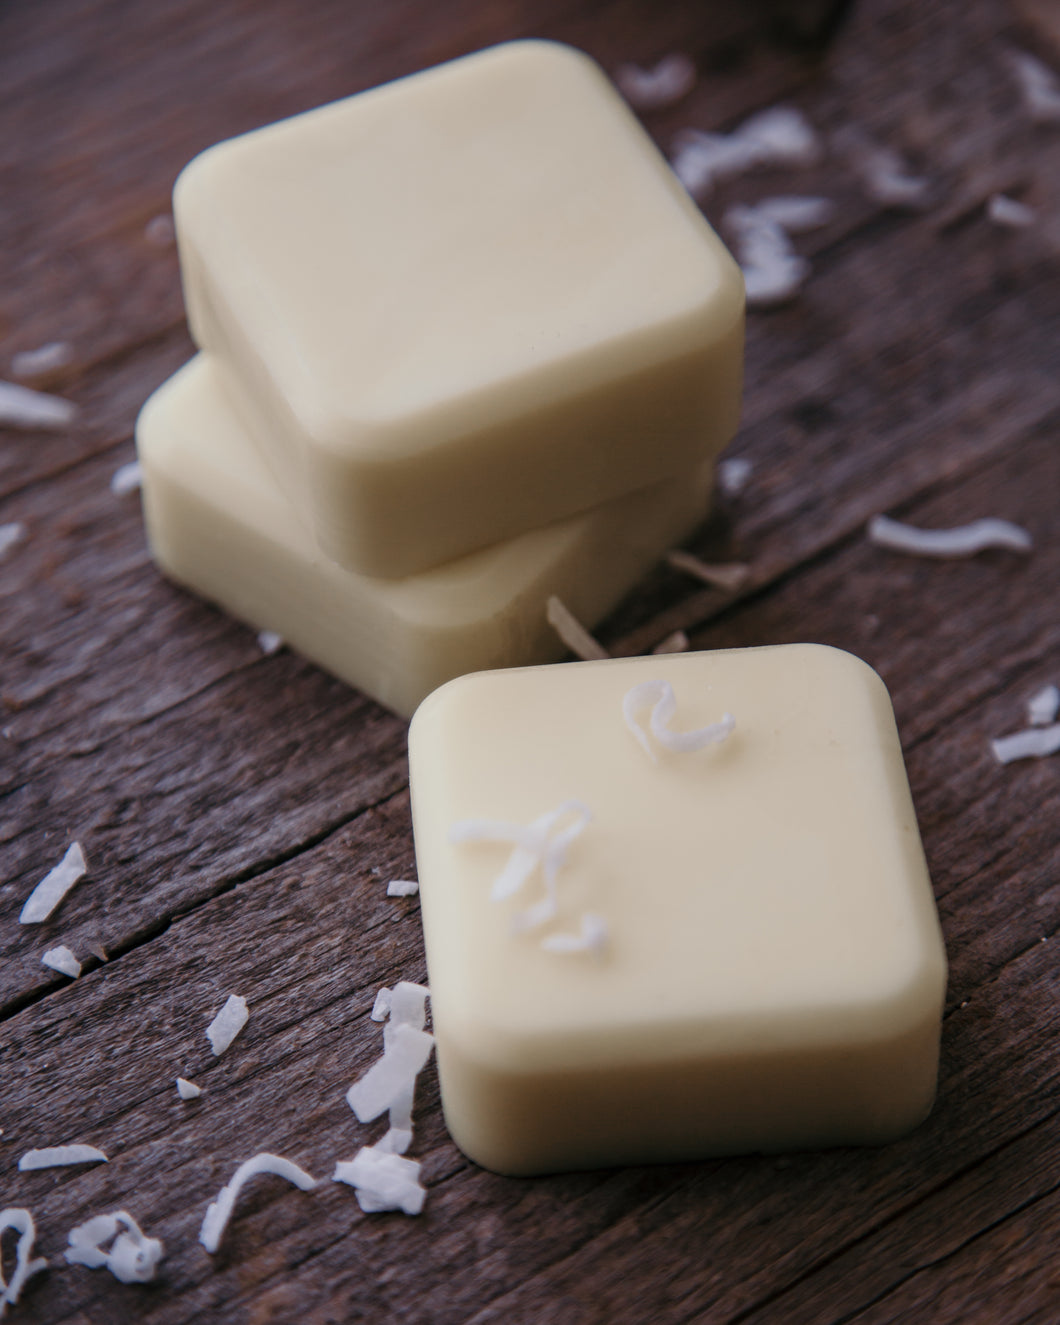 Three coconut lotion bars surrounded by shredded coconut.